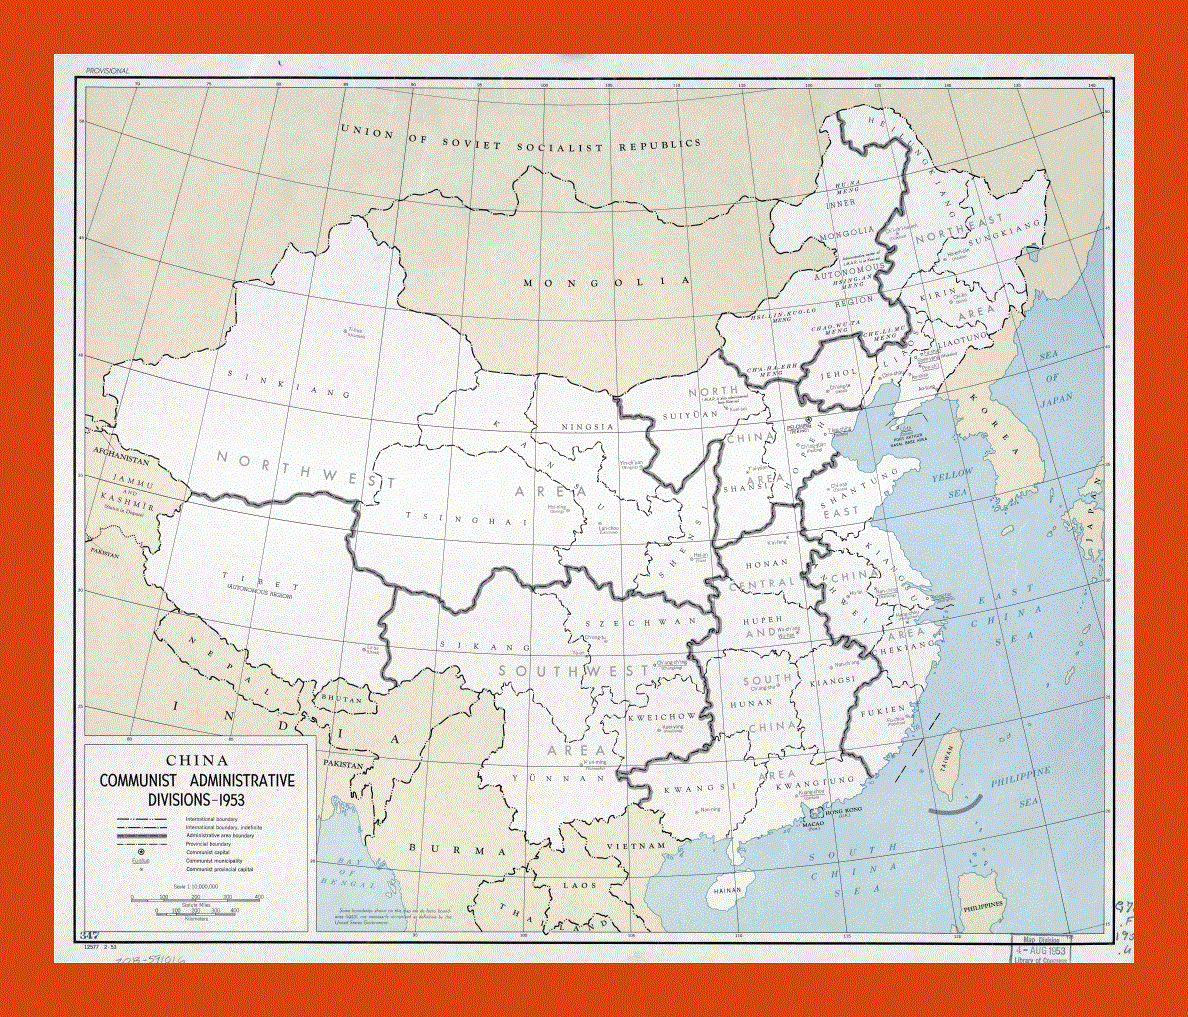 China Communist Administrative Divisions map - 1953